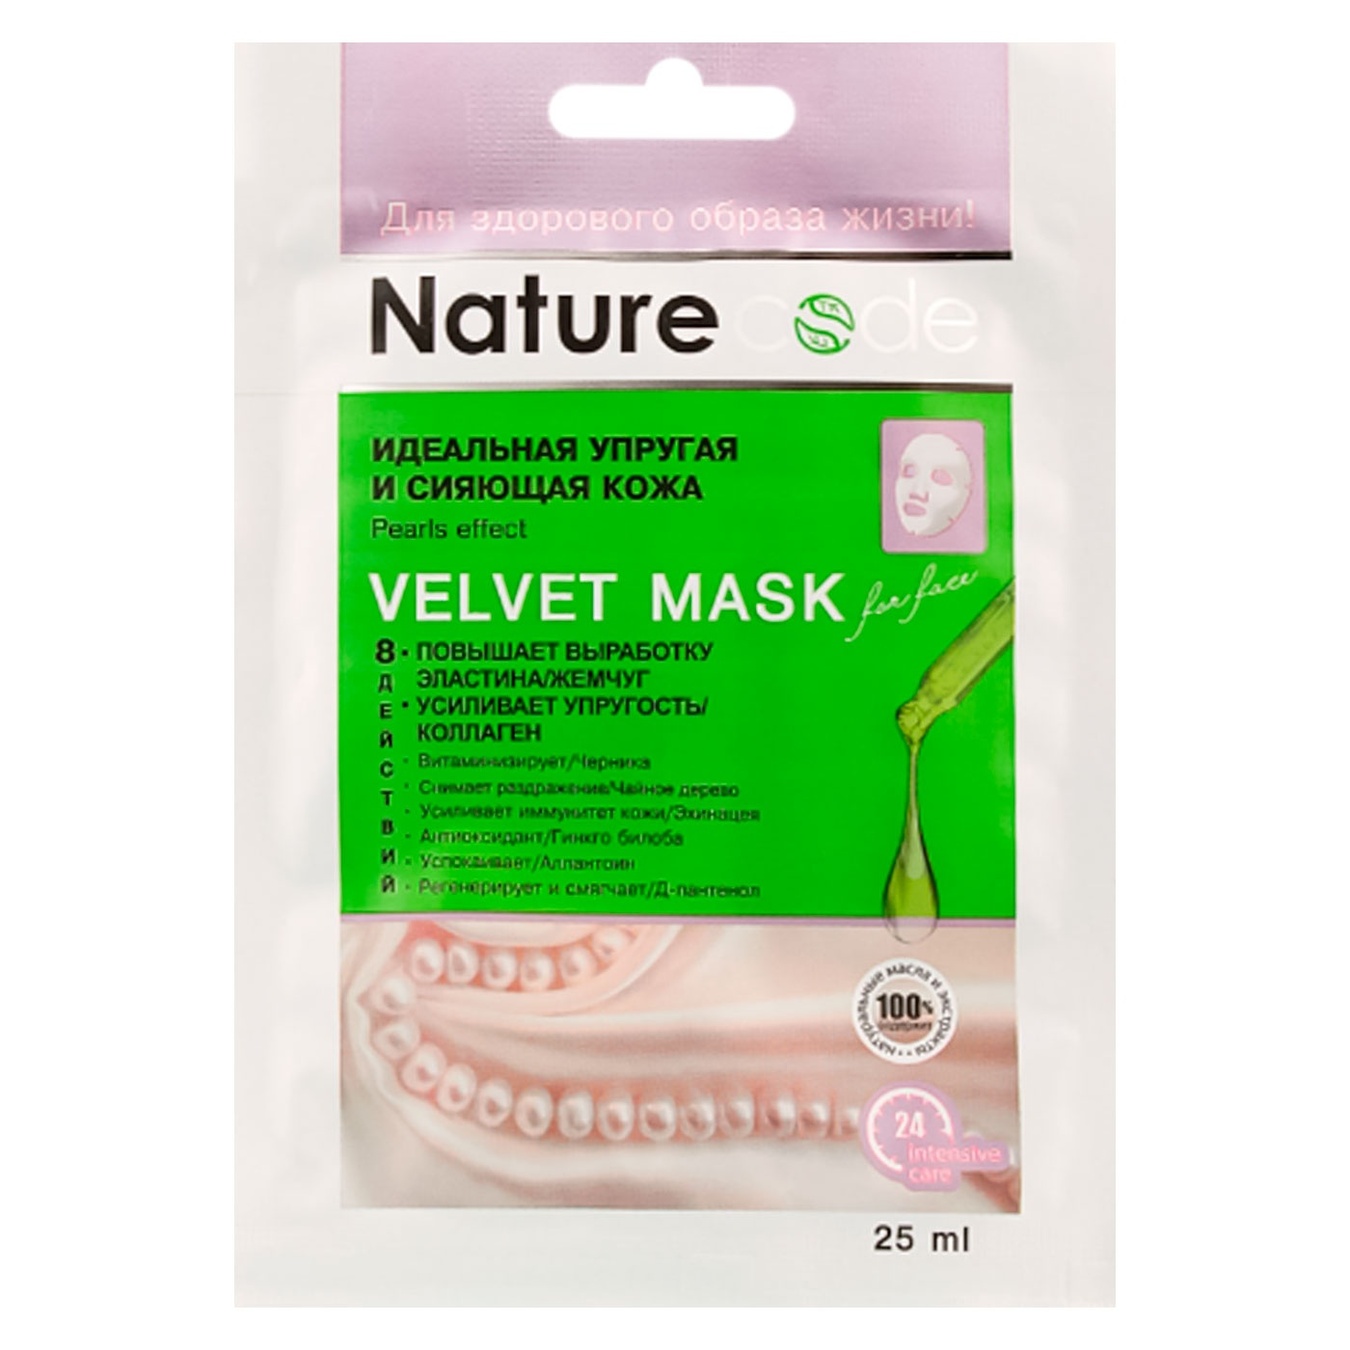 Face mask Nature CODE pearl effect fabric perfectly elastic and radiant 25ml